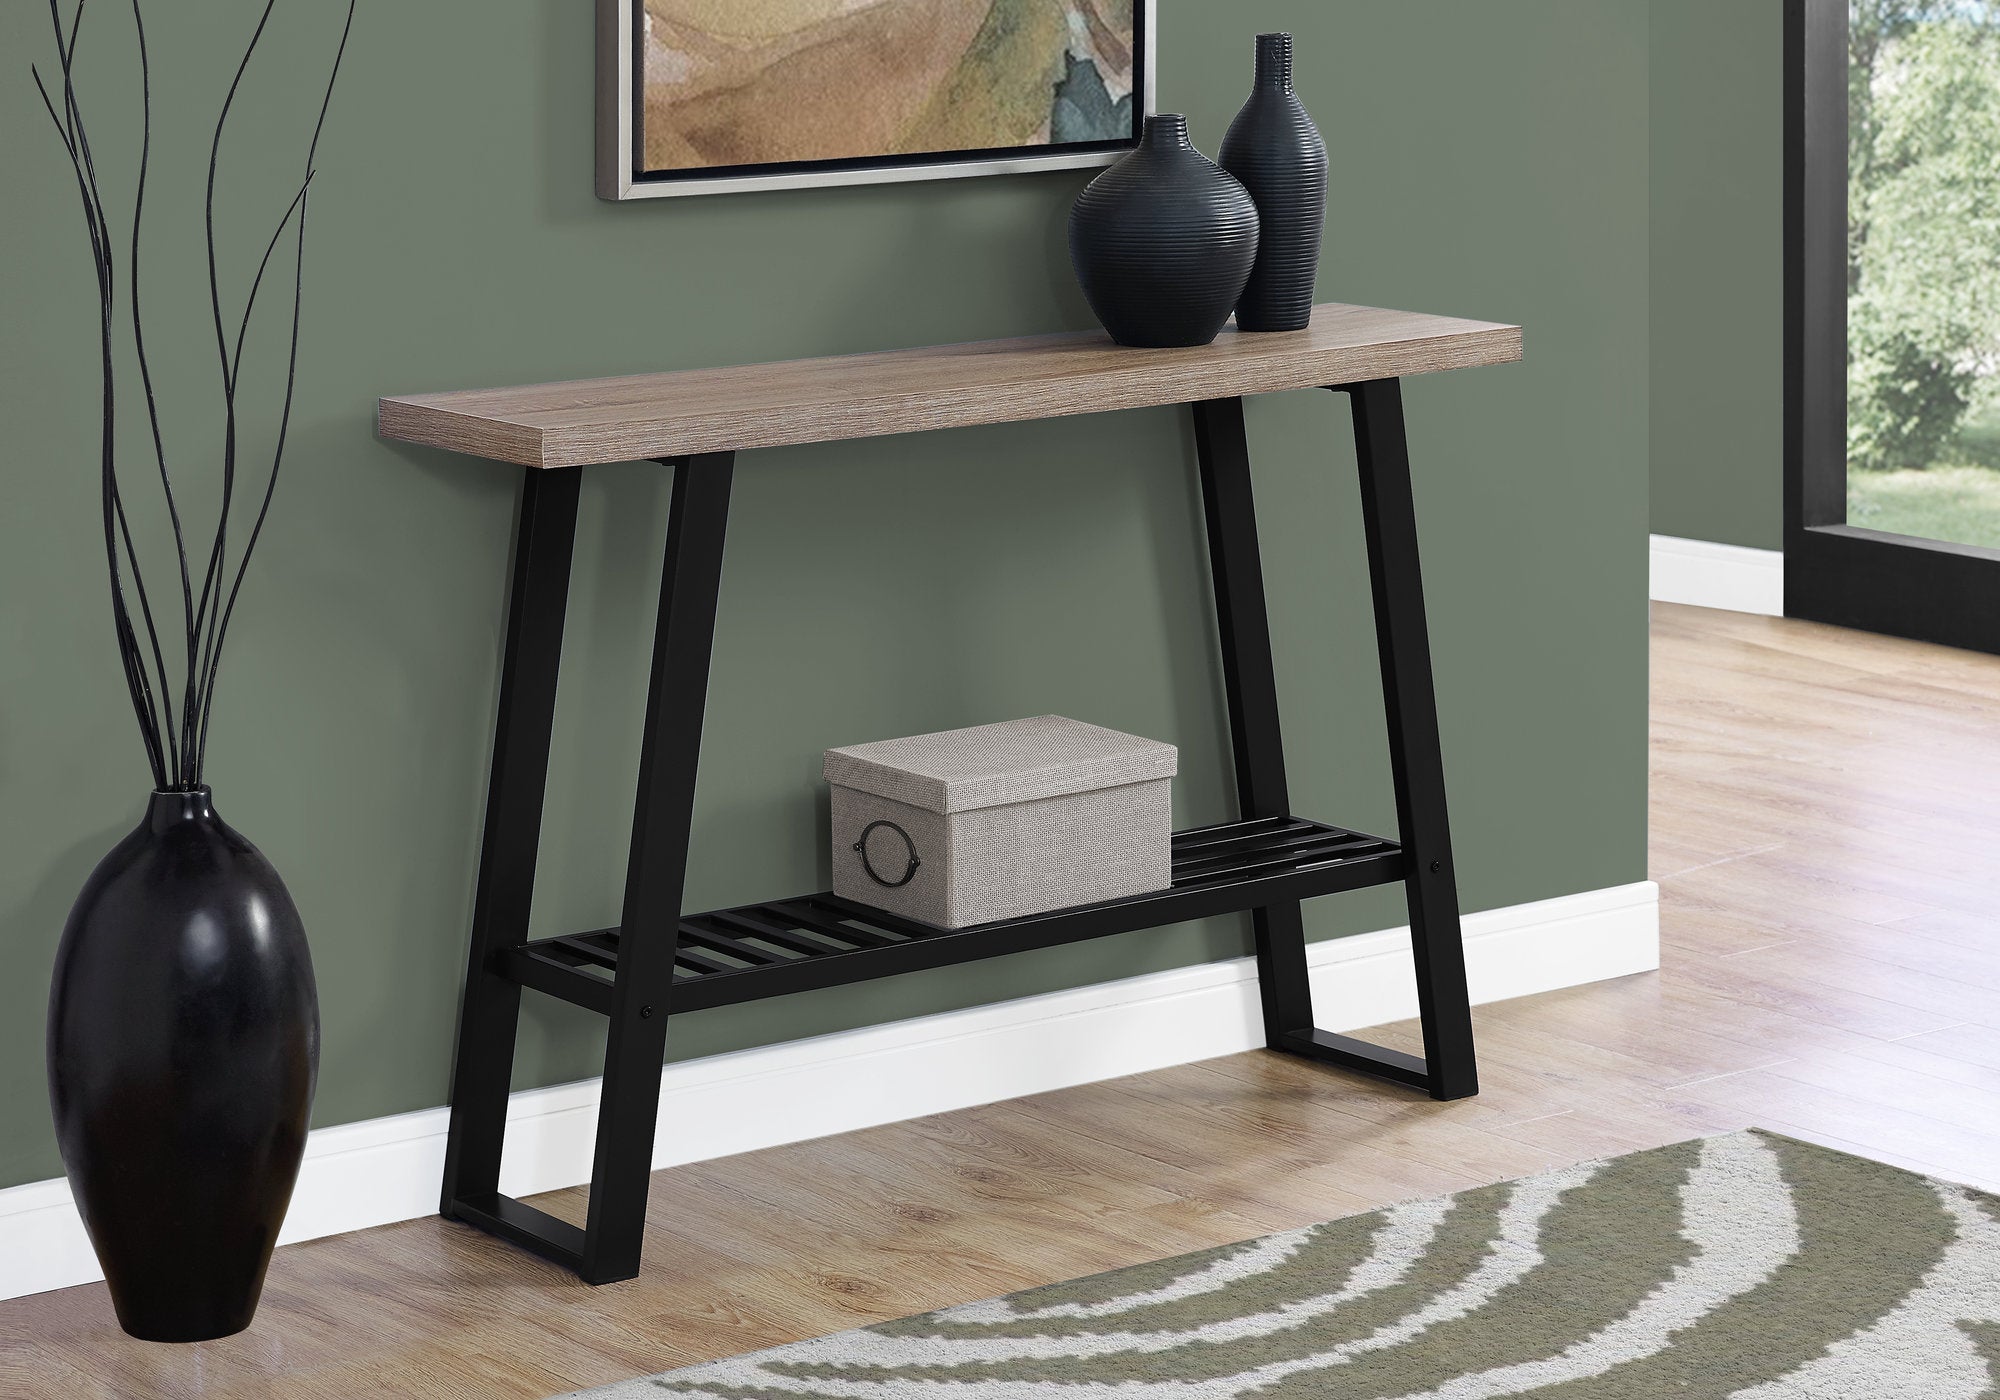 I 2117 - ACCENT TABLE - 48"L / DARK TAUPE / BLACK HALL CONSOLE BY MONARCH SPECIALTIES INC